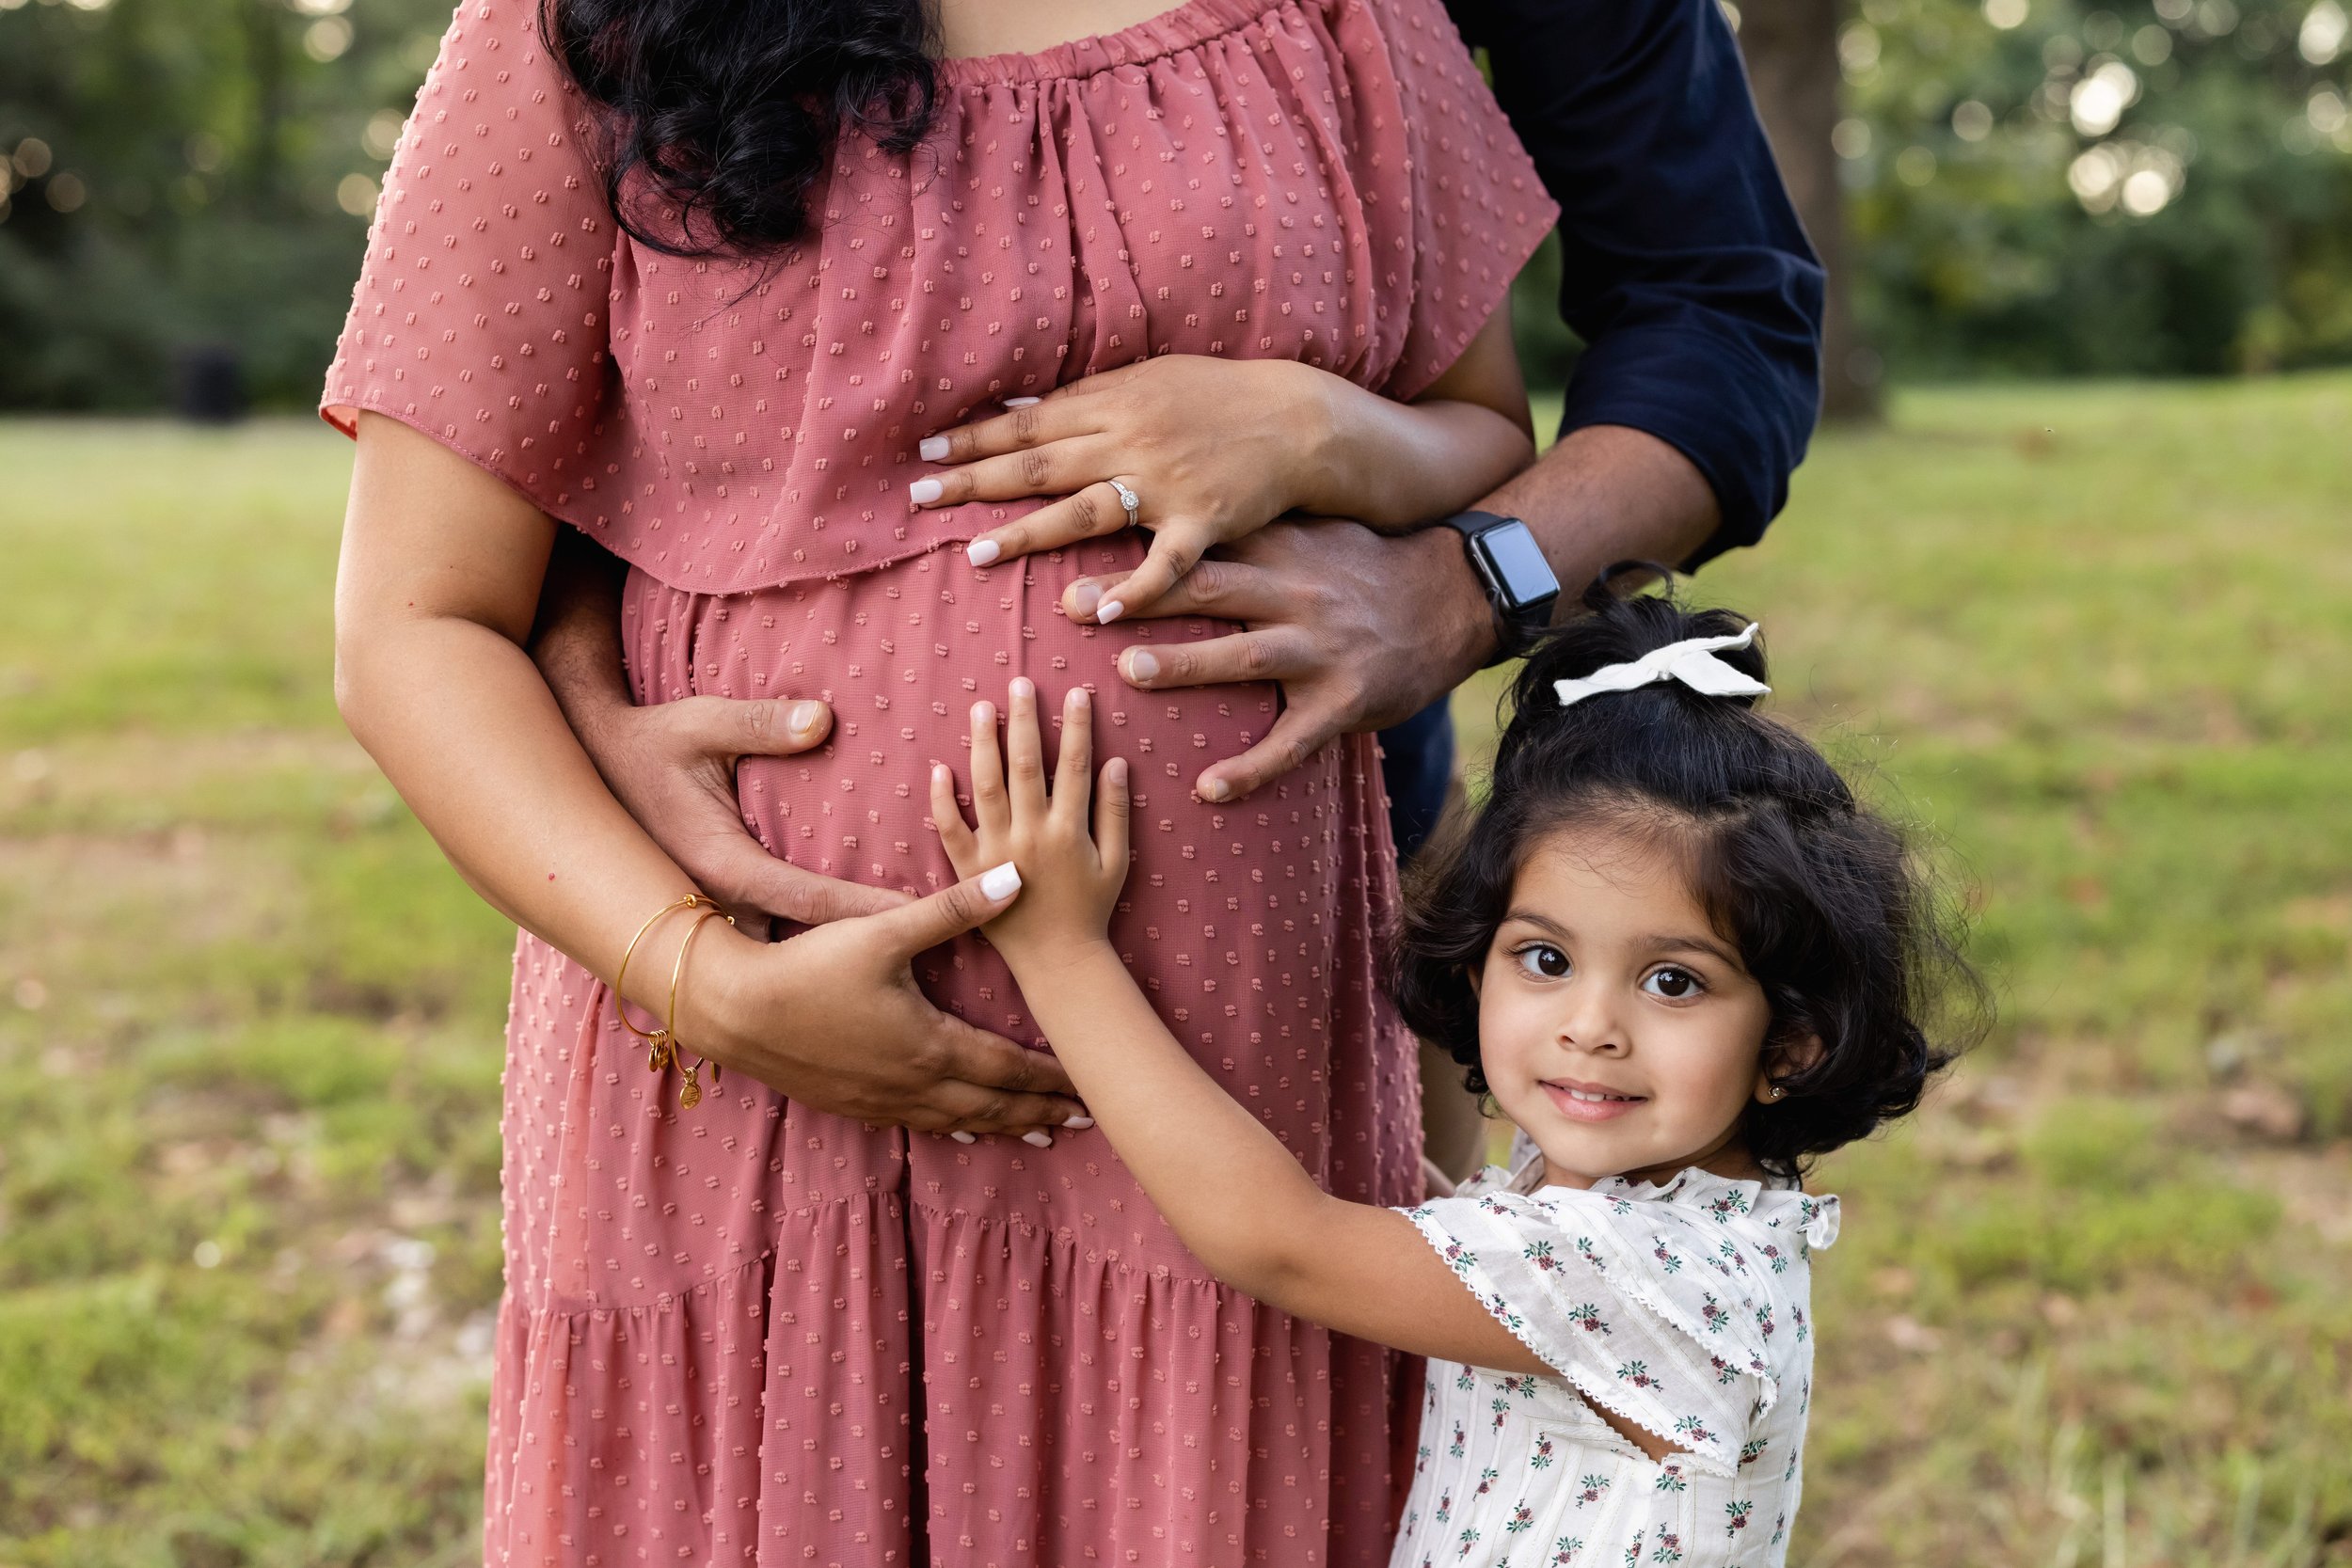  At a park near Atlanta a father stands behind his expectant wife and the father and mother place their hands on their child in utero as their young daughter stands next to them and places her hand on her mom’s belly at sunset. 